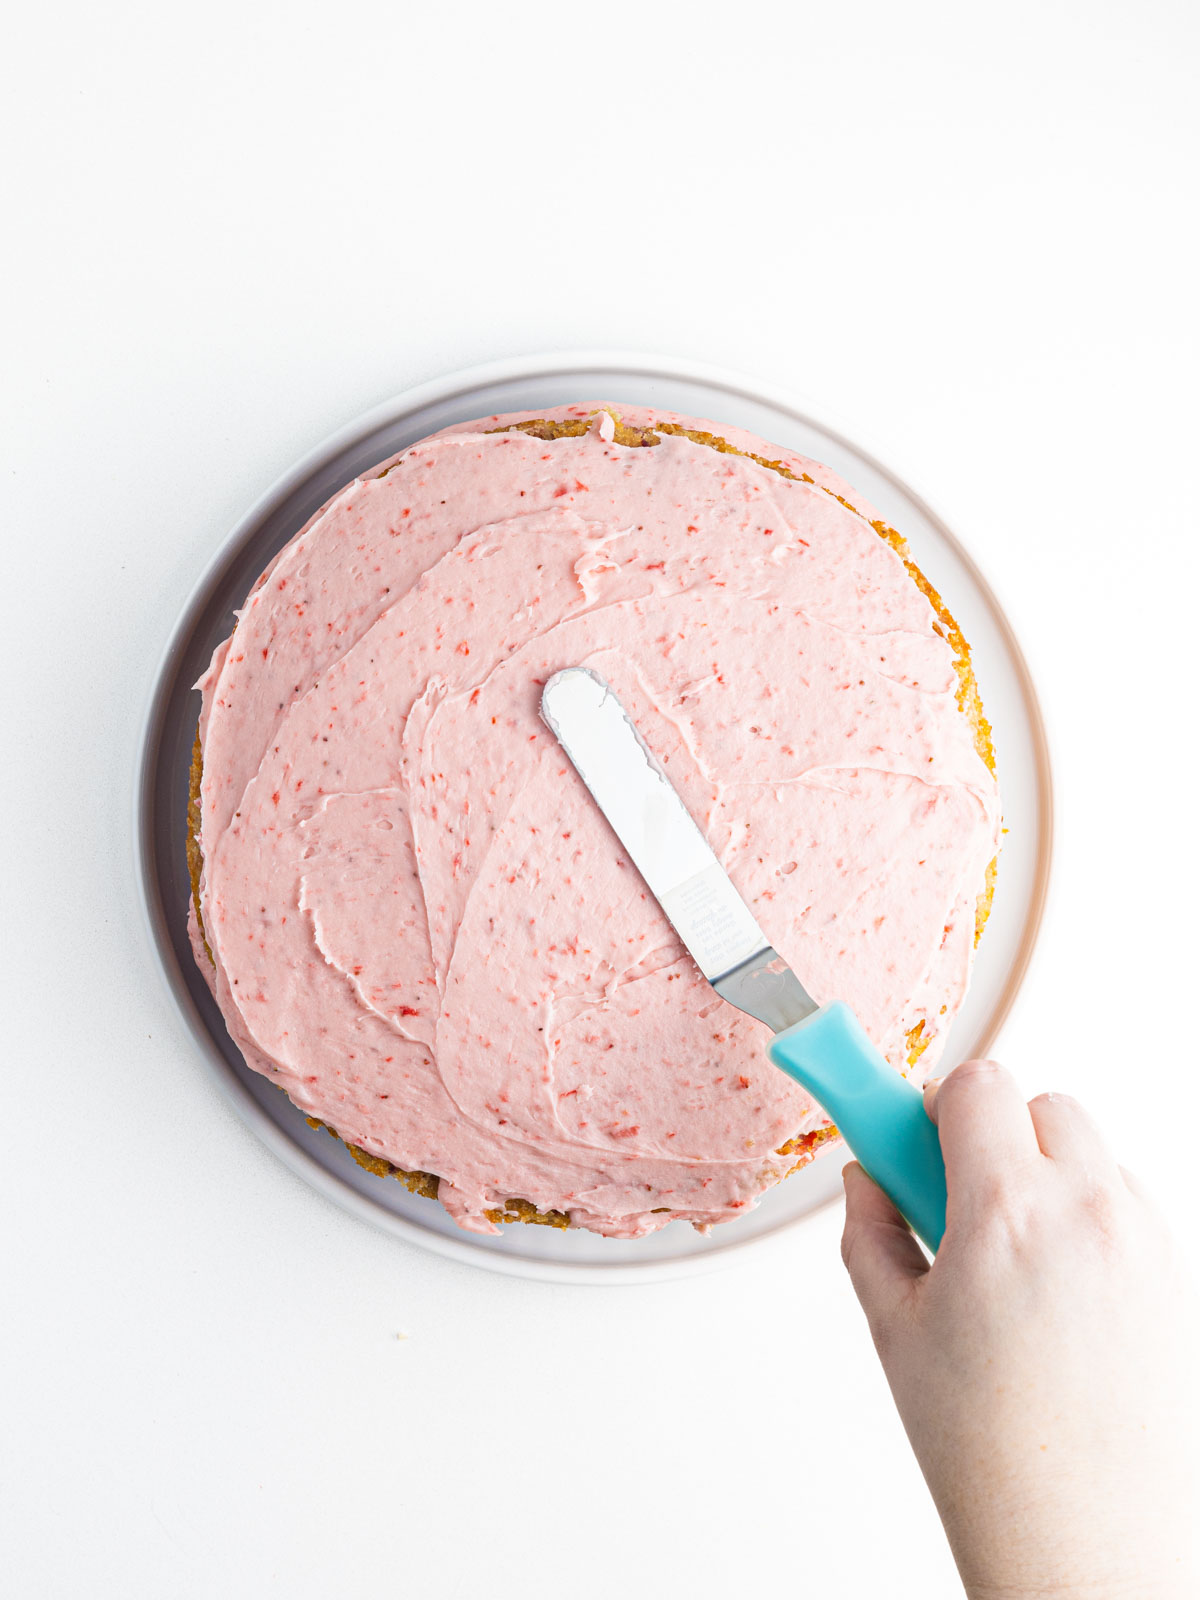 A hand holding an offset spatula with a blue handle spreading pink frosting over the top of the cake.